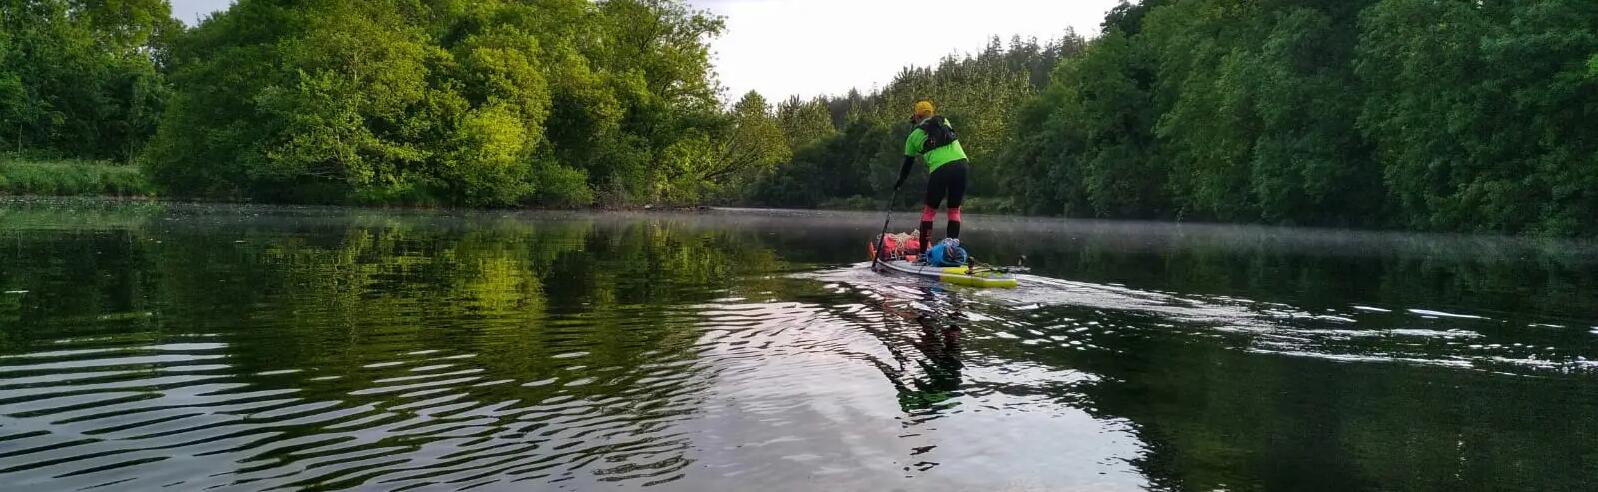 nantes brest stand up paddle gonflable